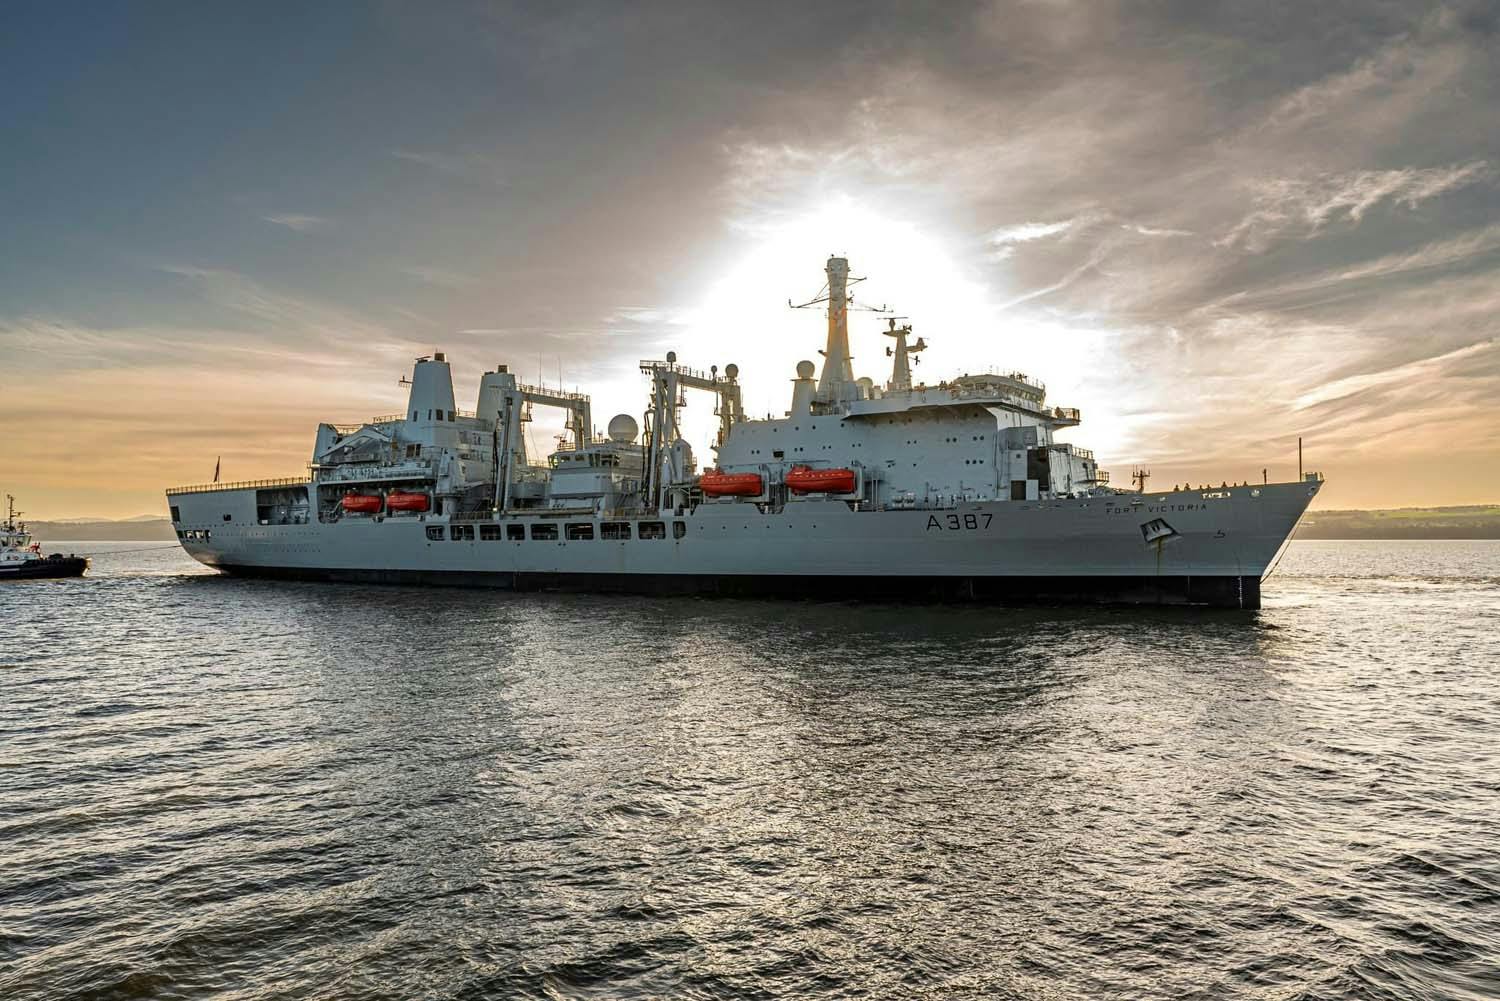 RFA Fort Victoria returns to operations after refit